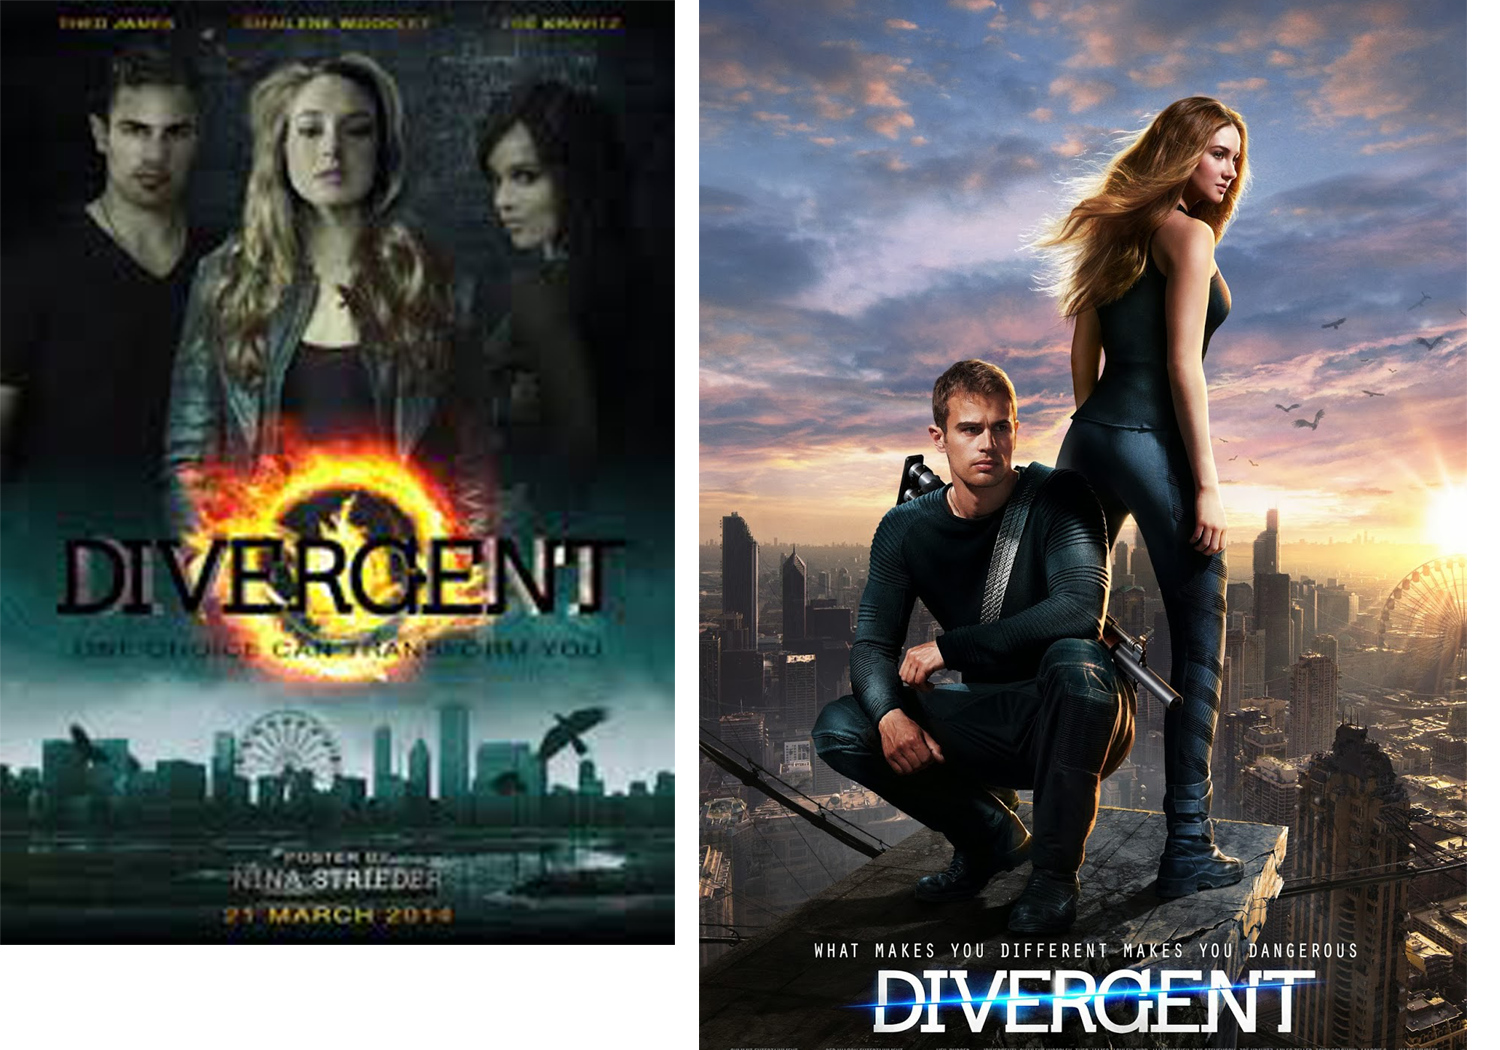 English Movies Cafe: Watch Diveregent Online free Full ...